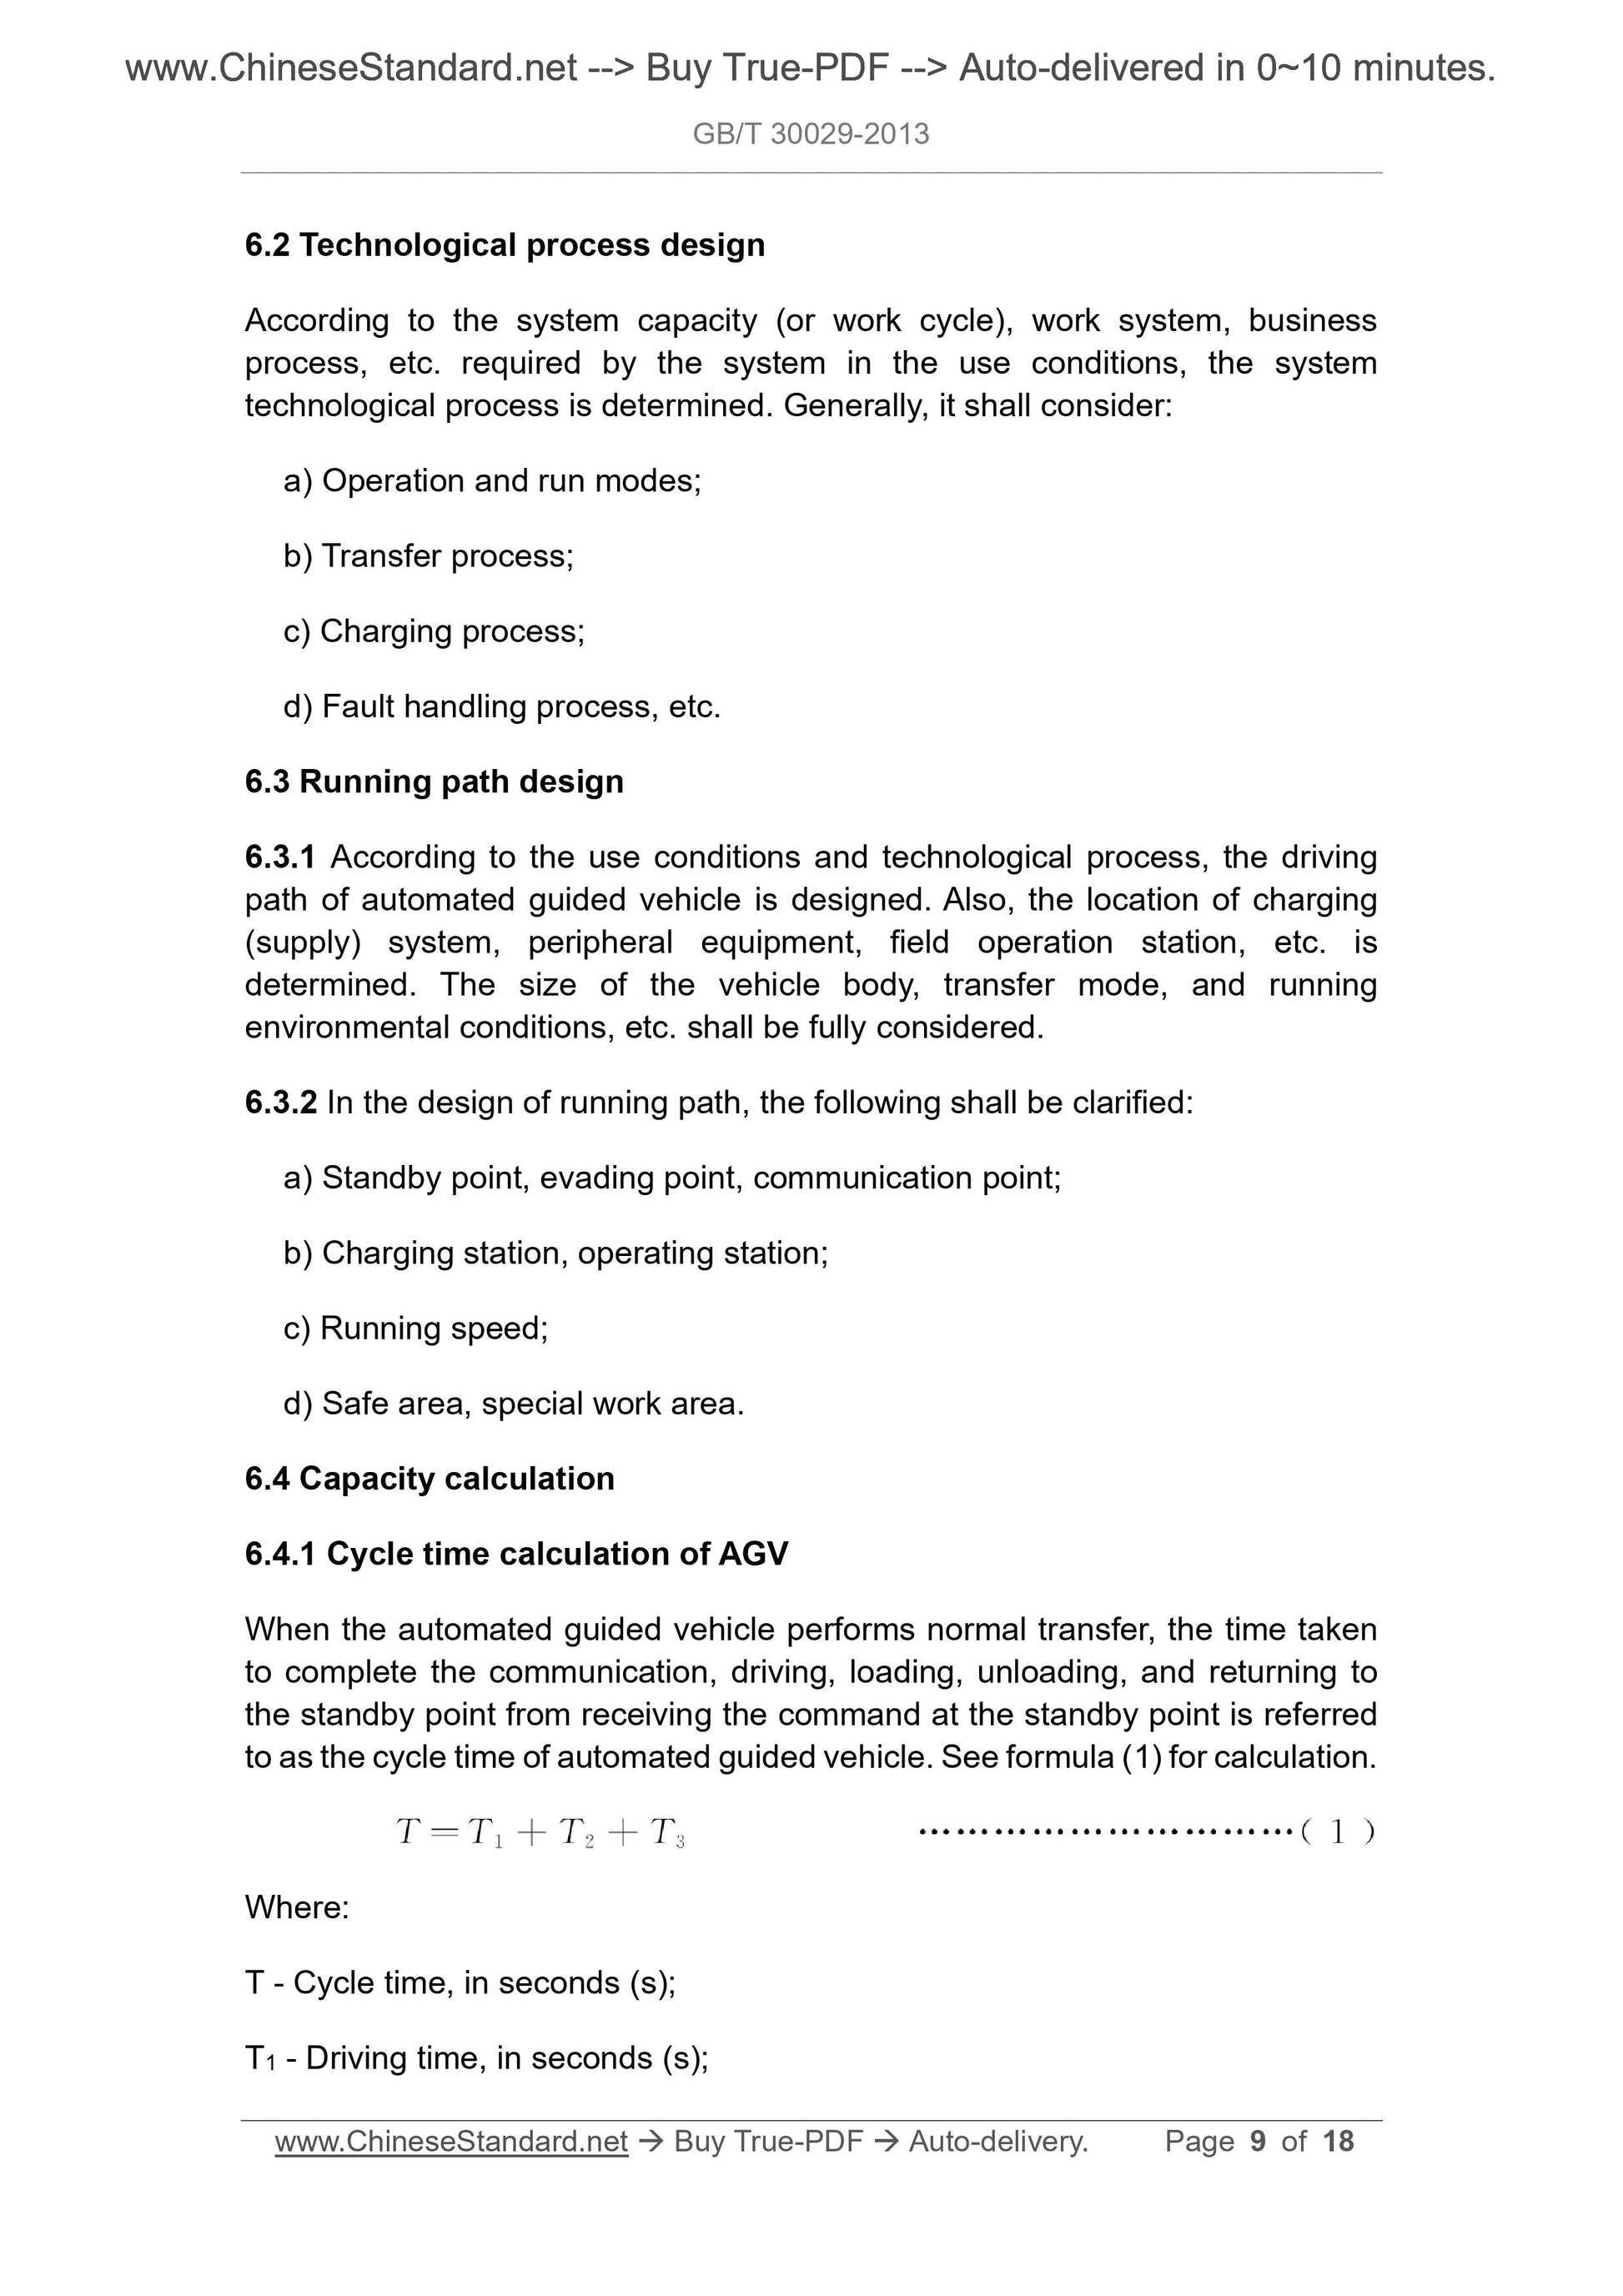 GB/T 30029-2013 Page 6